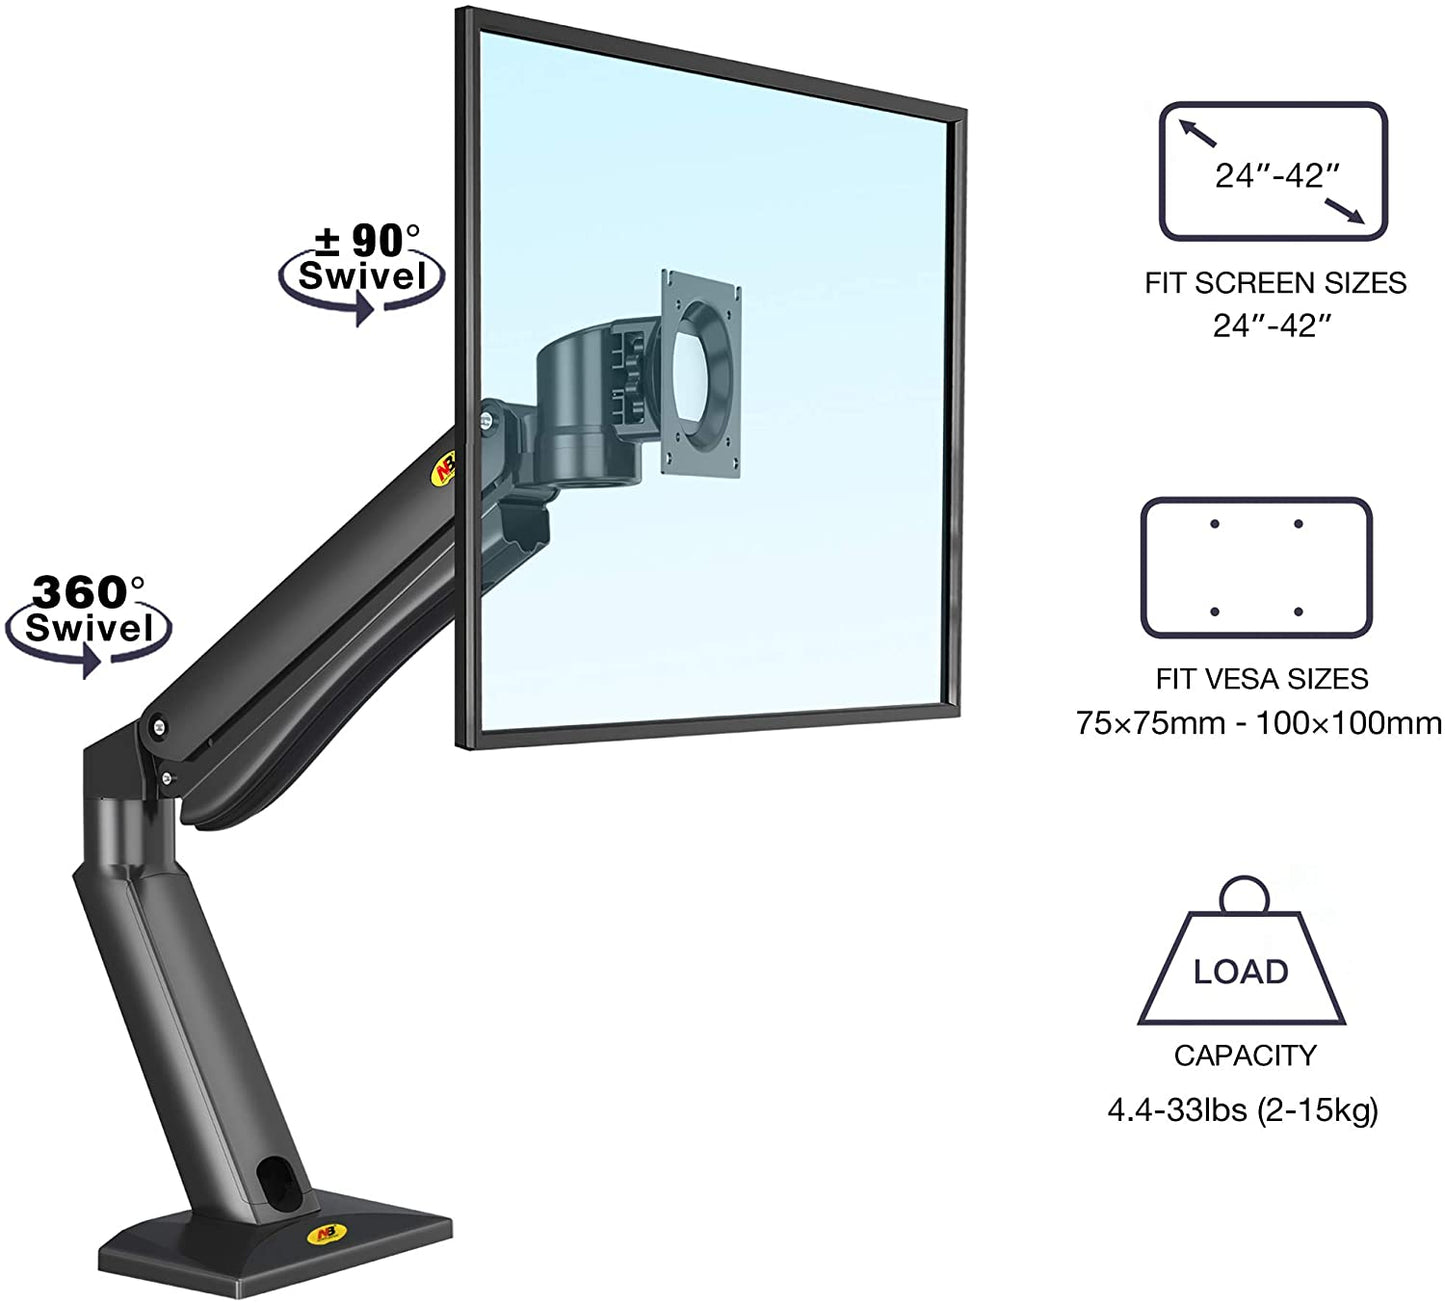 NB North Bayou NB45 24"- 42" with 15Kg Max Payload Heavy Duty VESA Monitor Desk Mount Stand and Gas Strut Full Motion Swivel Arm for Large Screen LCD LED TV Television